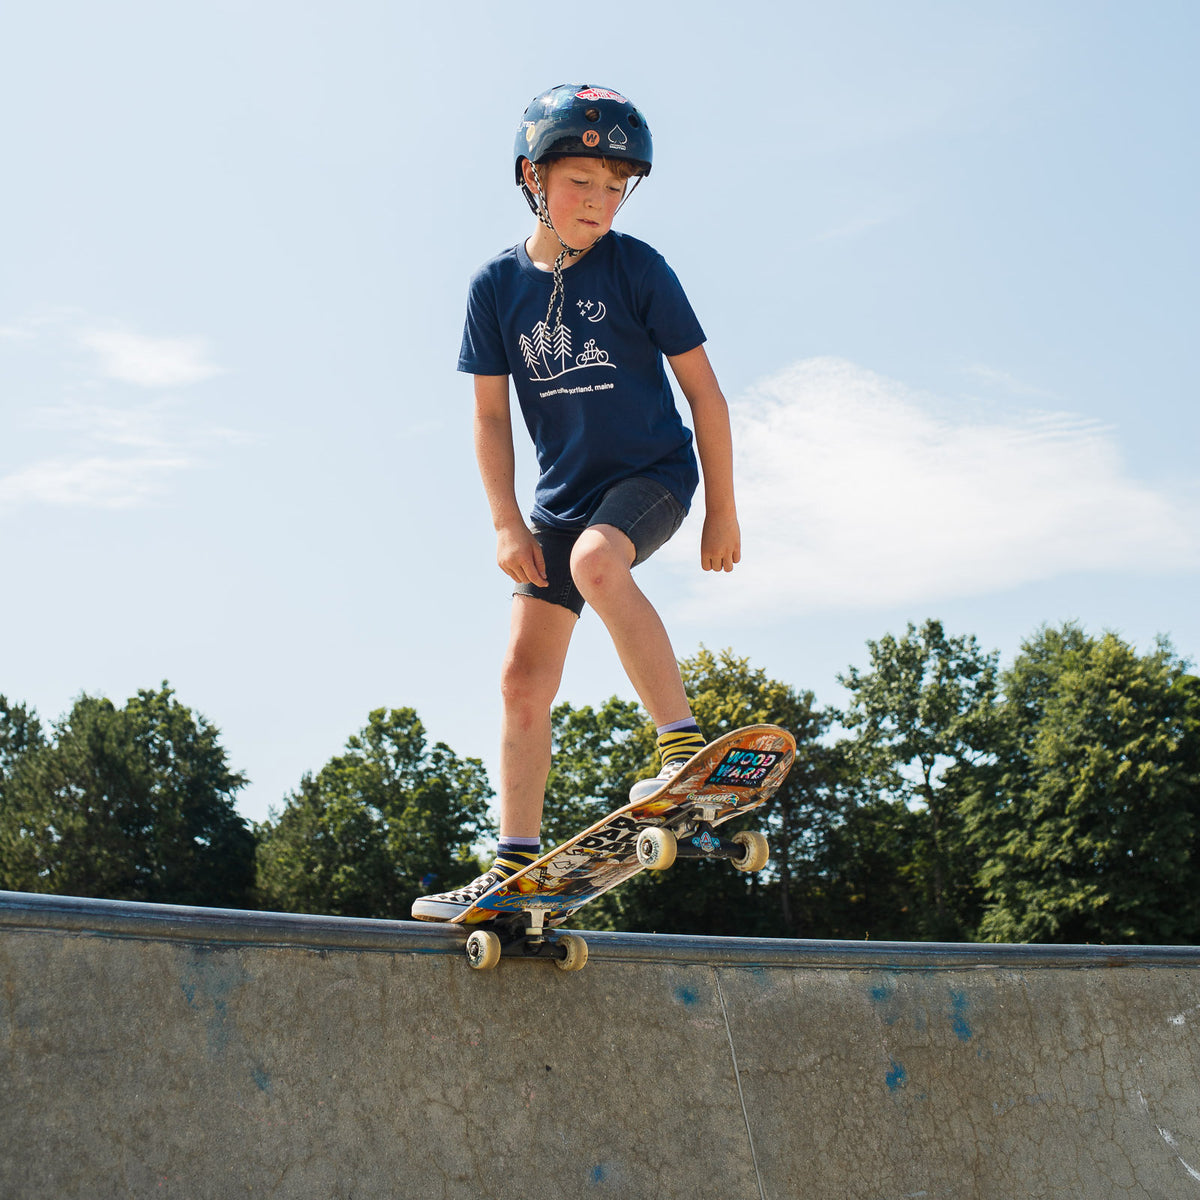 A young boy wearing a helmet and a Tandem Kids Tandem Moon Tee is skateboarding at the edge of a concrete skate park ramp on a sunny day.